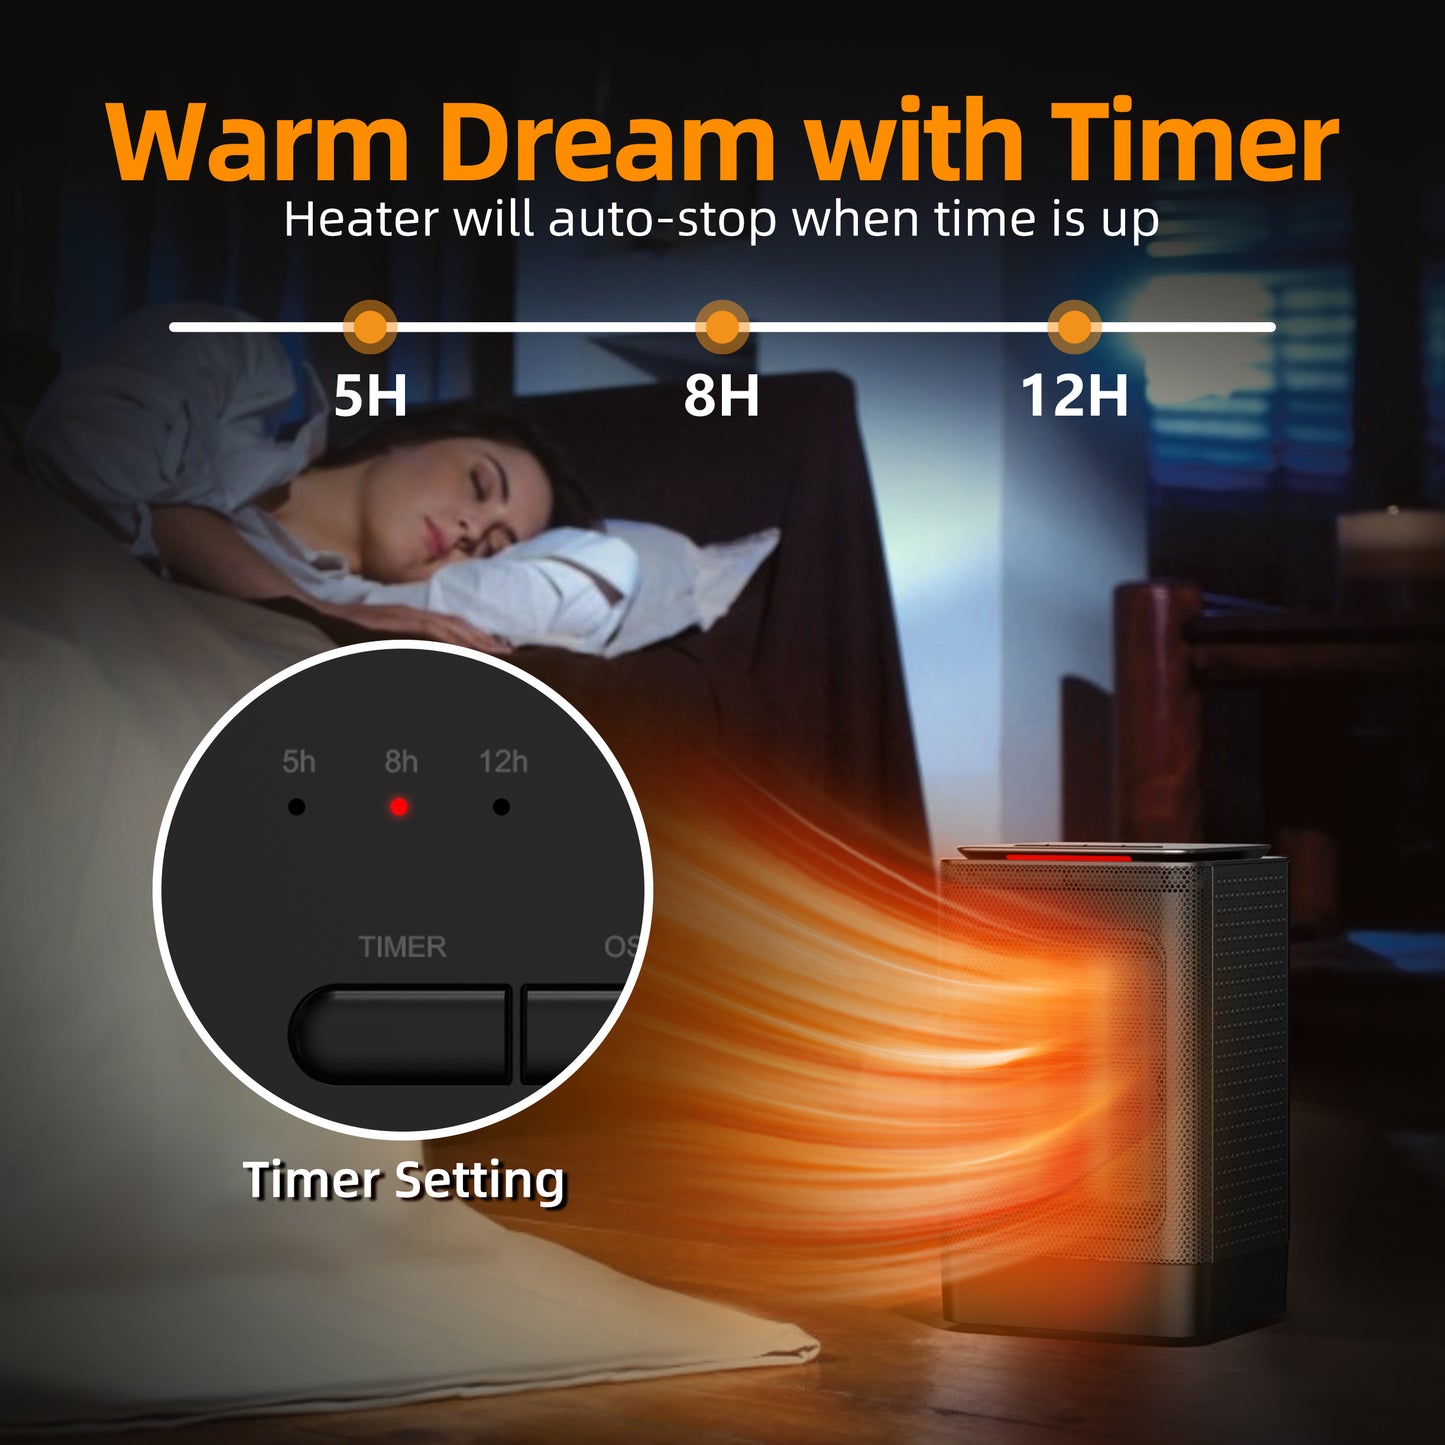 Alrocket Space Heater, 1500W Electric PTC Ceramic Heater Fast Heating with Oscillation & Overheat Tip-over Protection